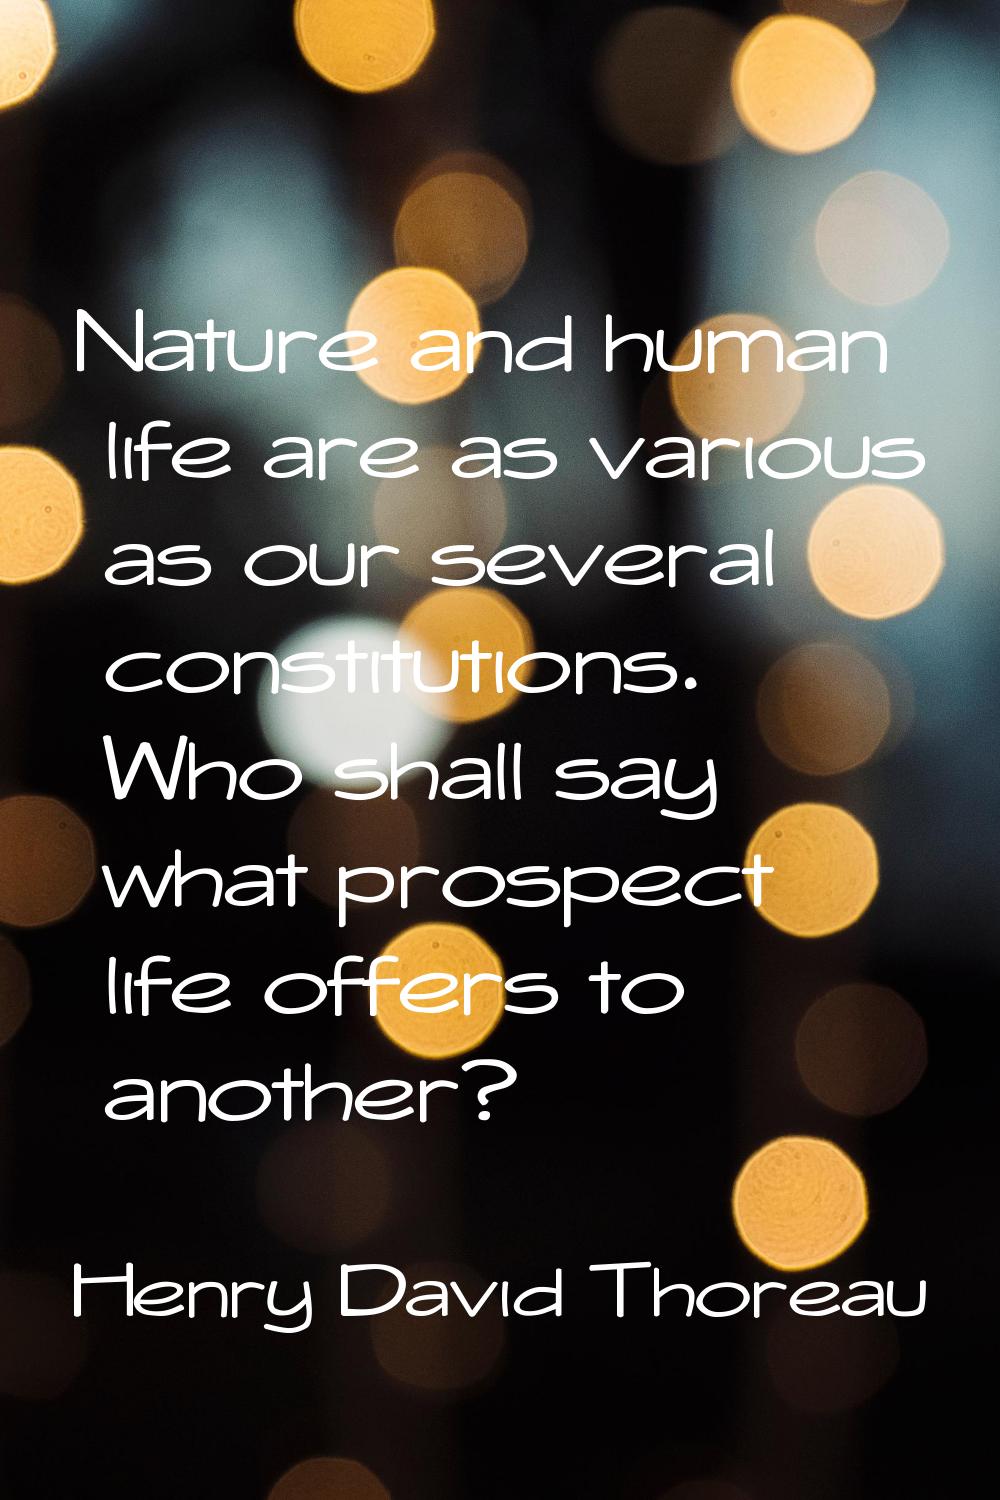 Nature and human life are as various as our several constitutions. Who shall say what prospect life